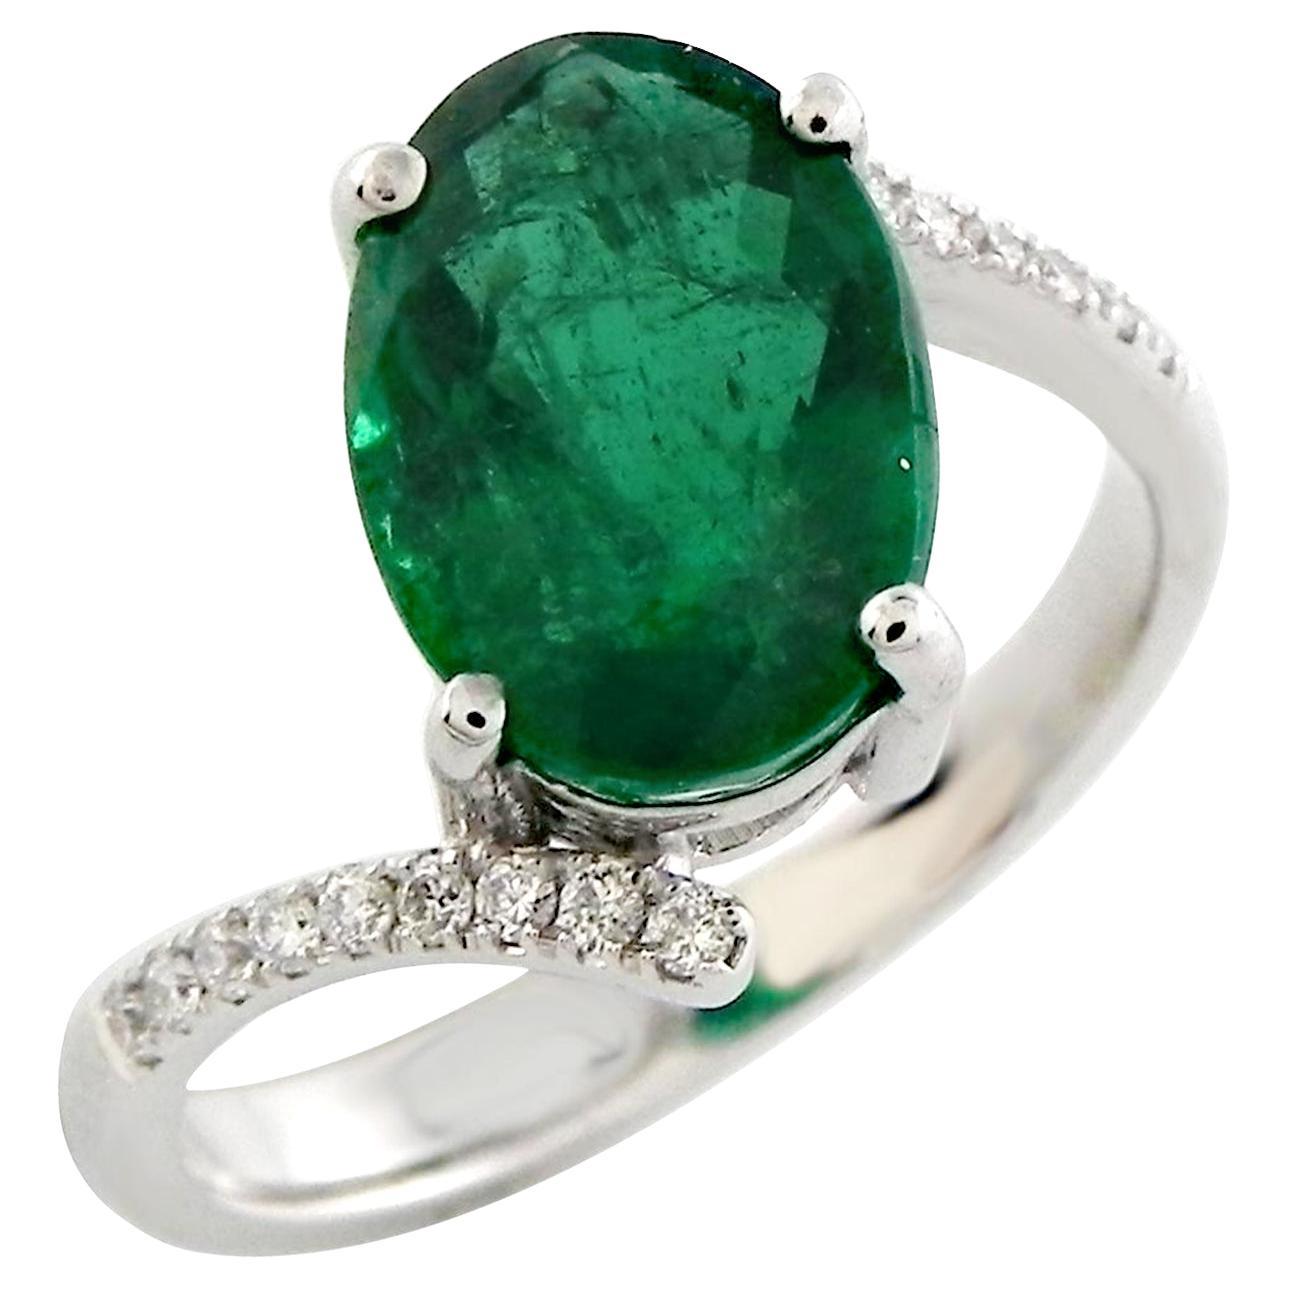 Oval Shaped Emerald Ring With Diamonds Made In 18k Gold For Sale